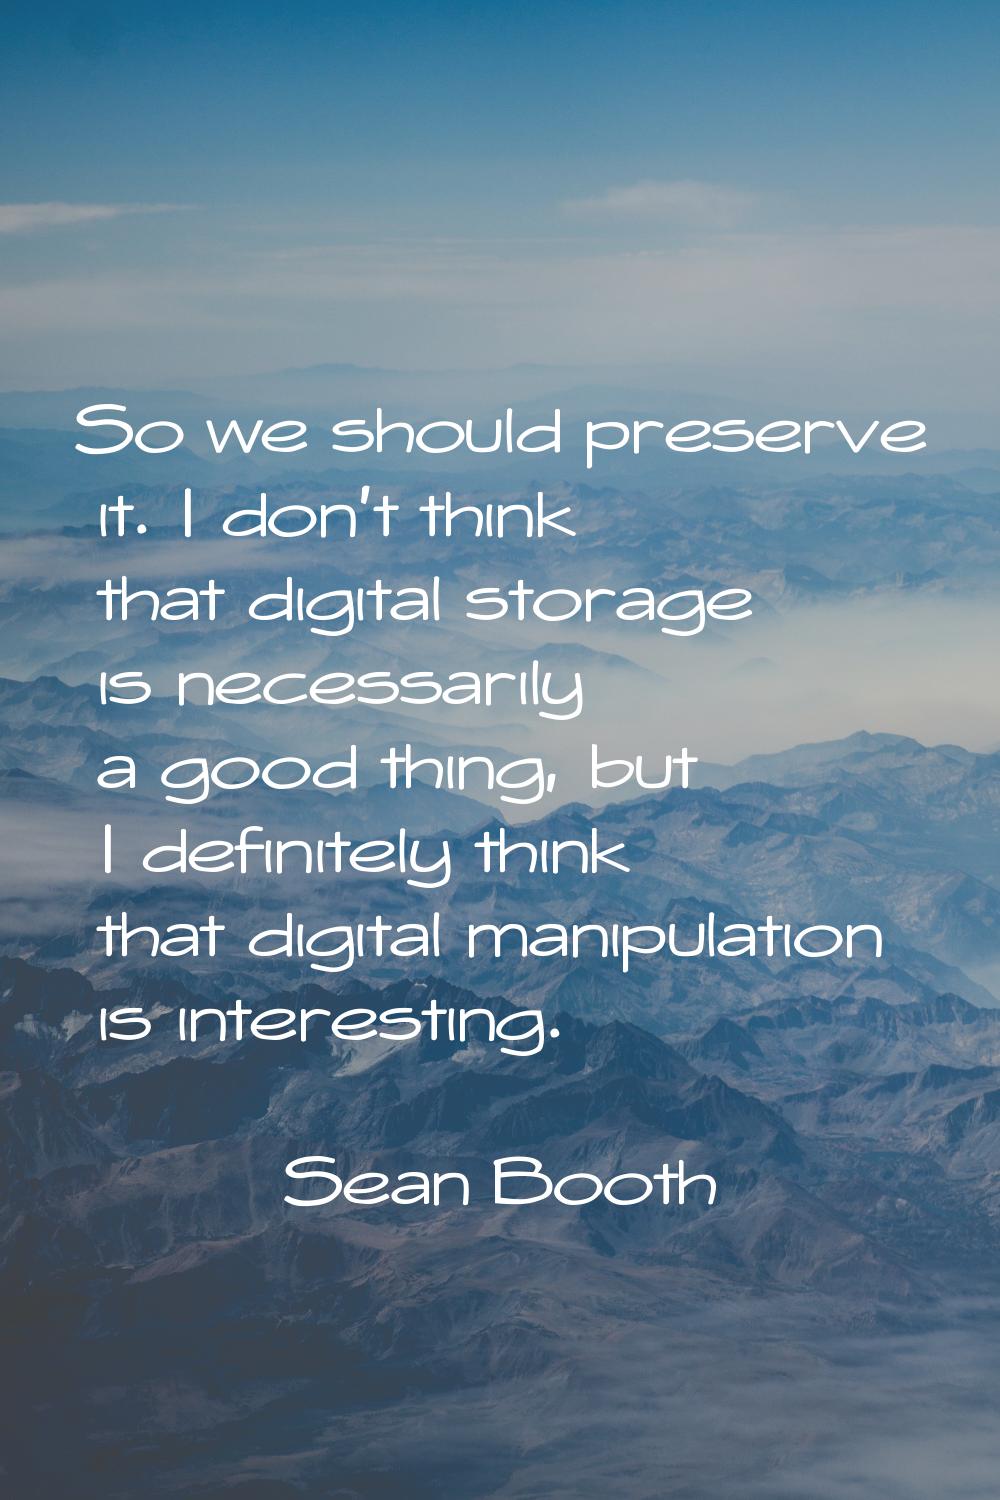 So we should preserve it. I don't think that digital storage is necessarily a good thing, but I def